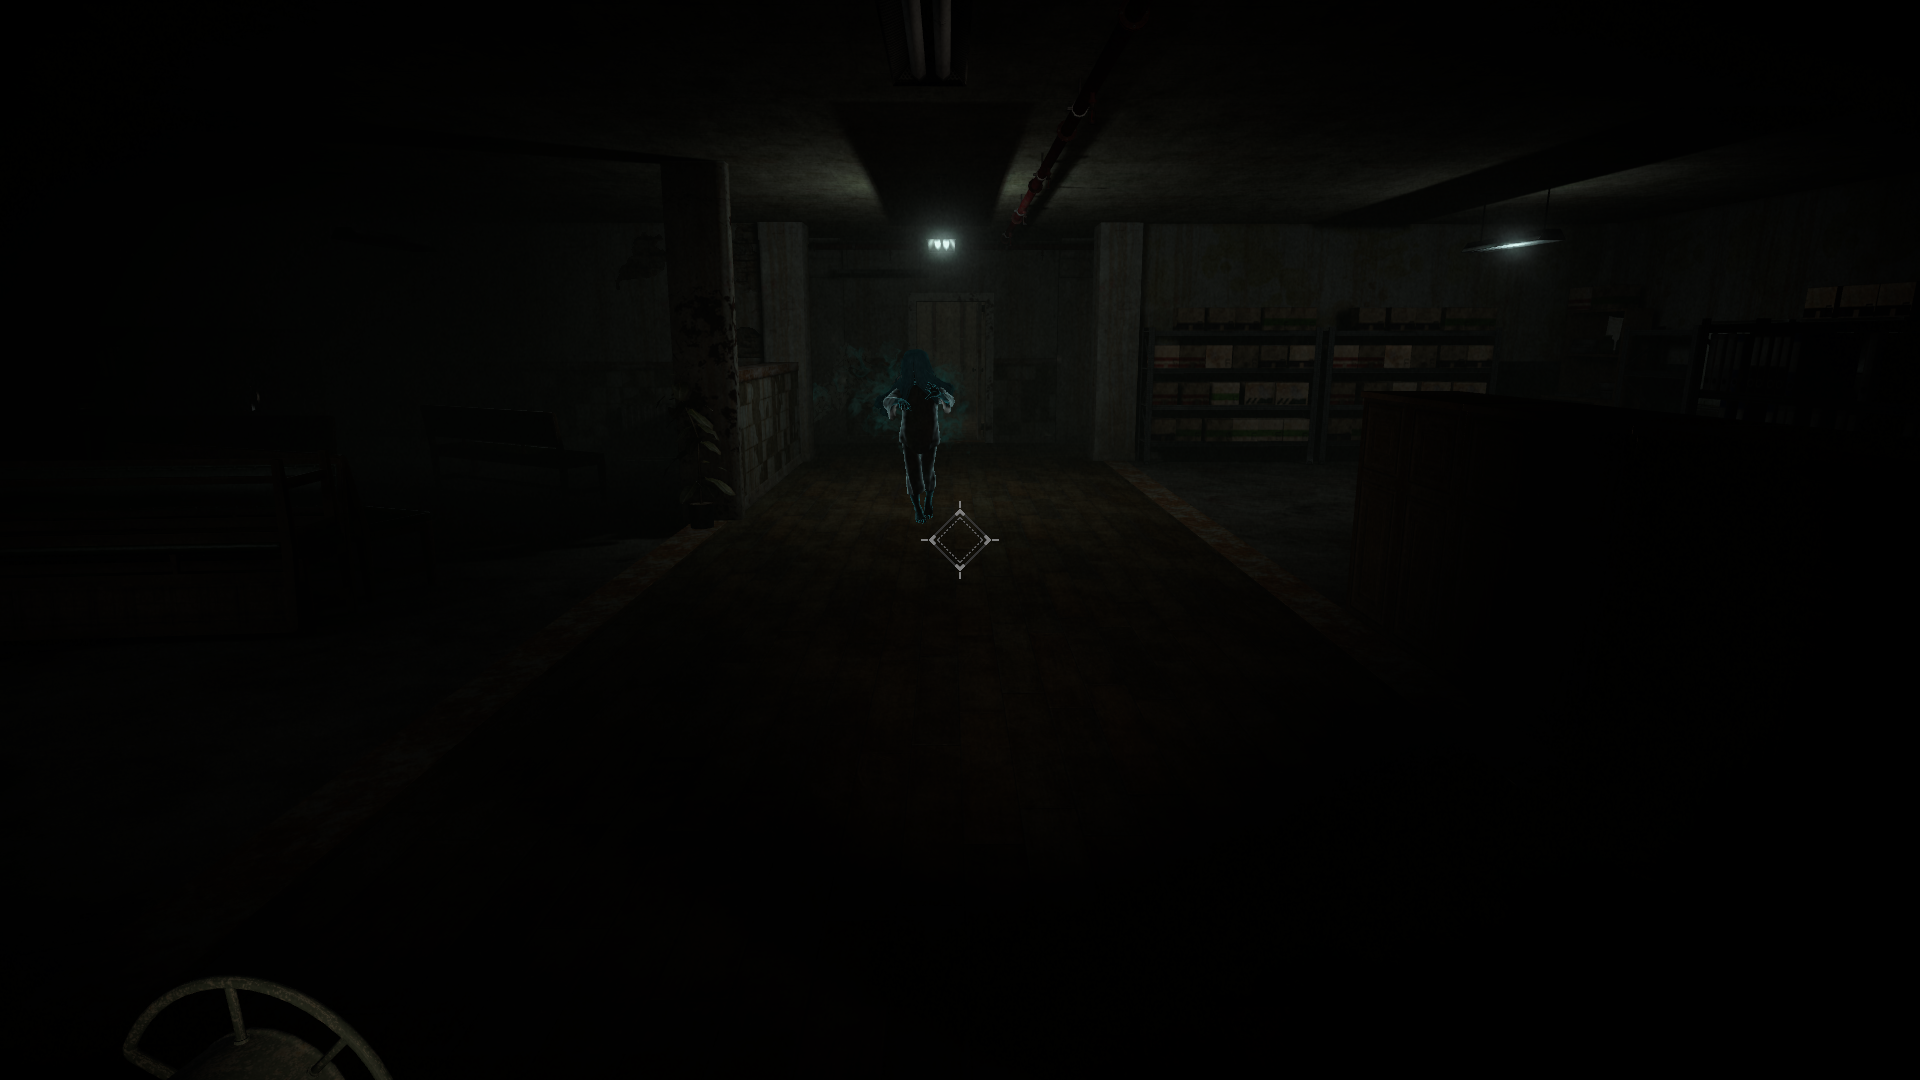 Screenshot of the game. A spectral figure runs toward the player in a dark storage room.